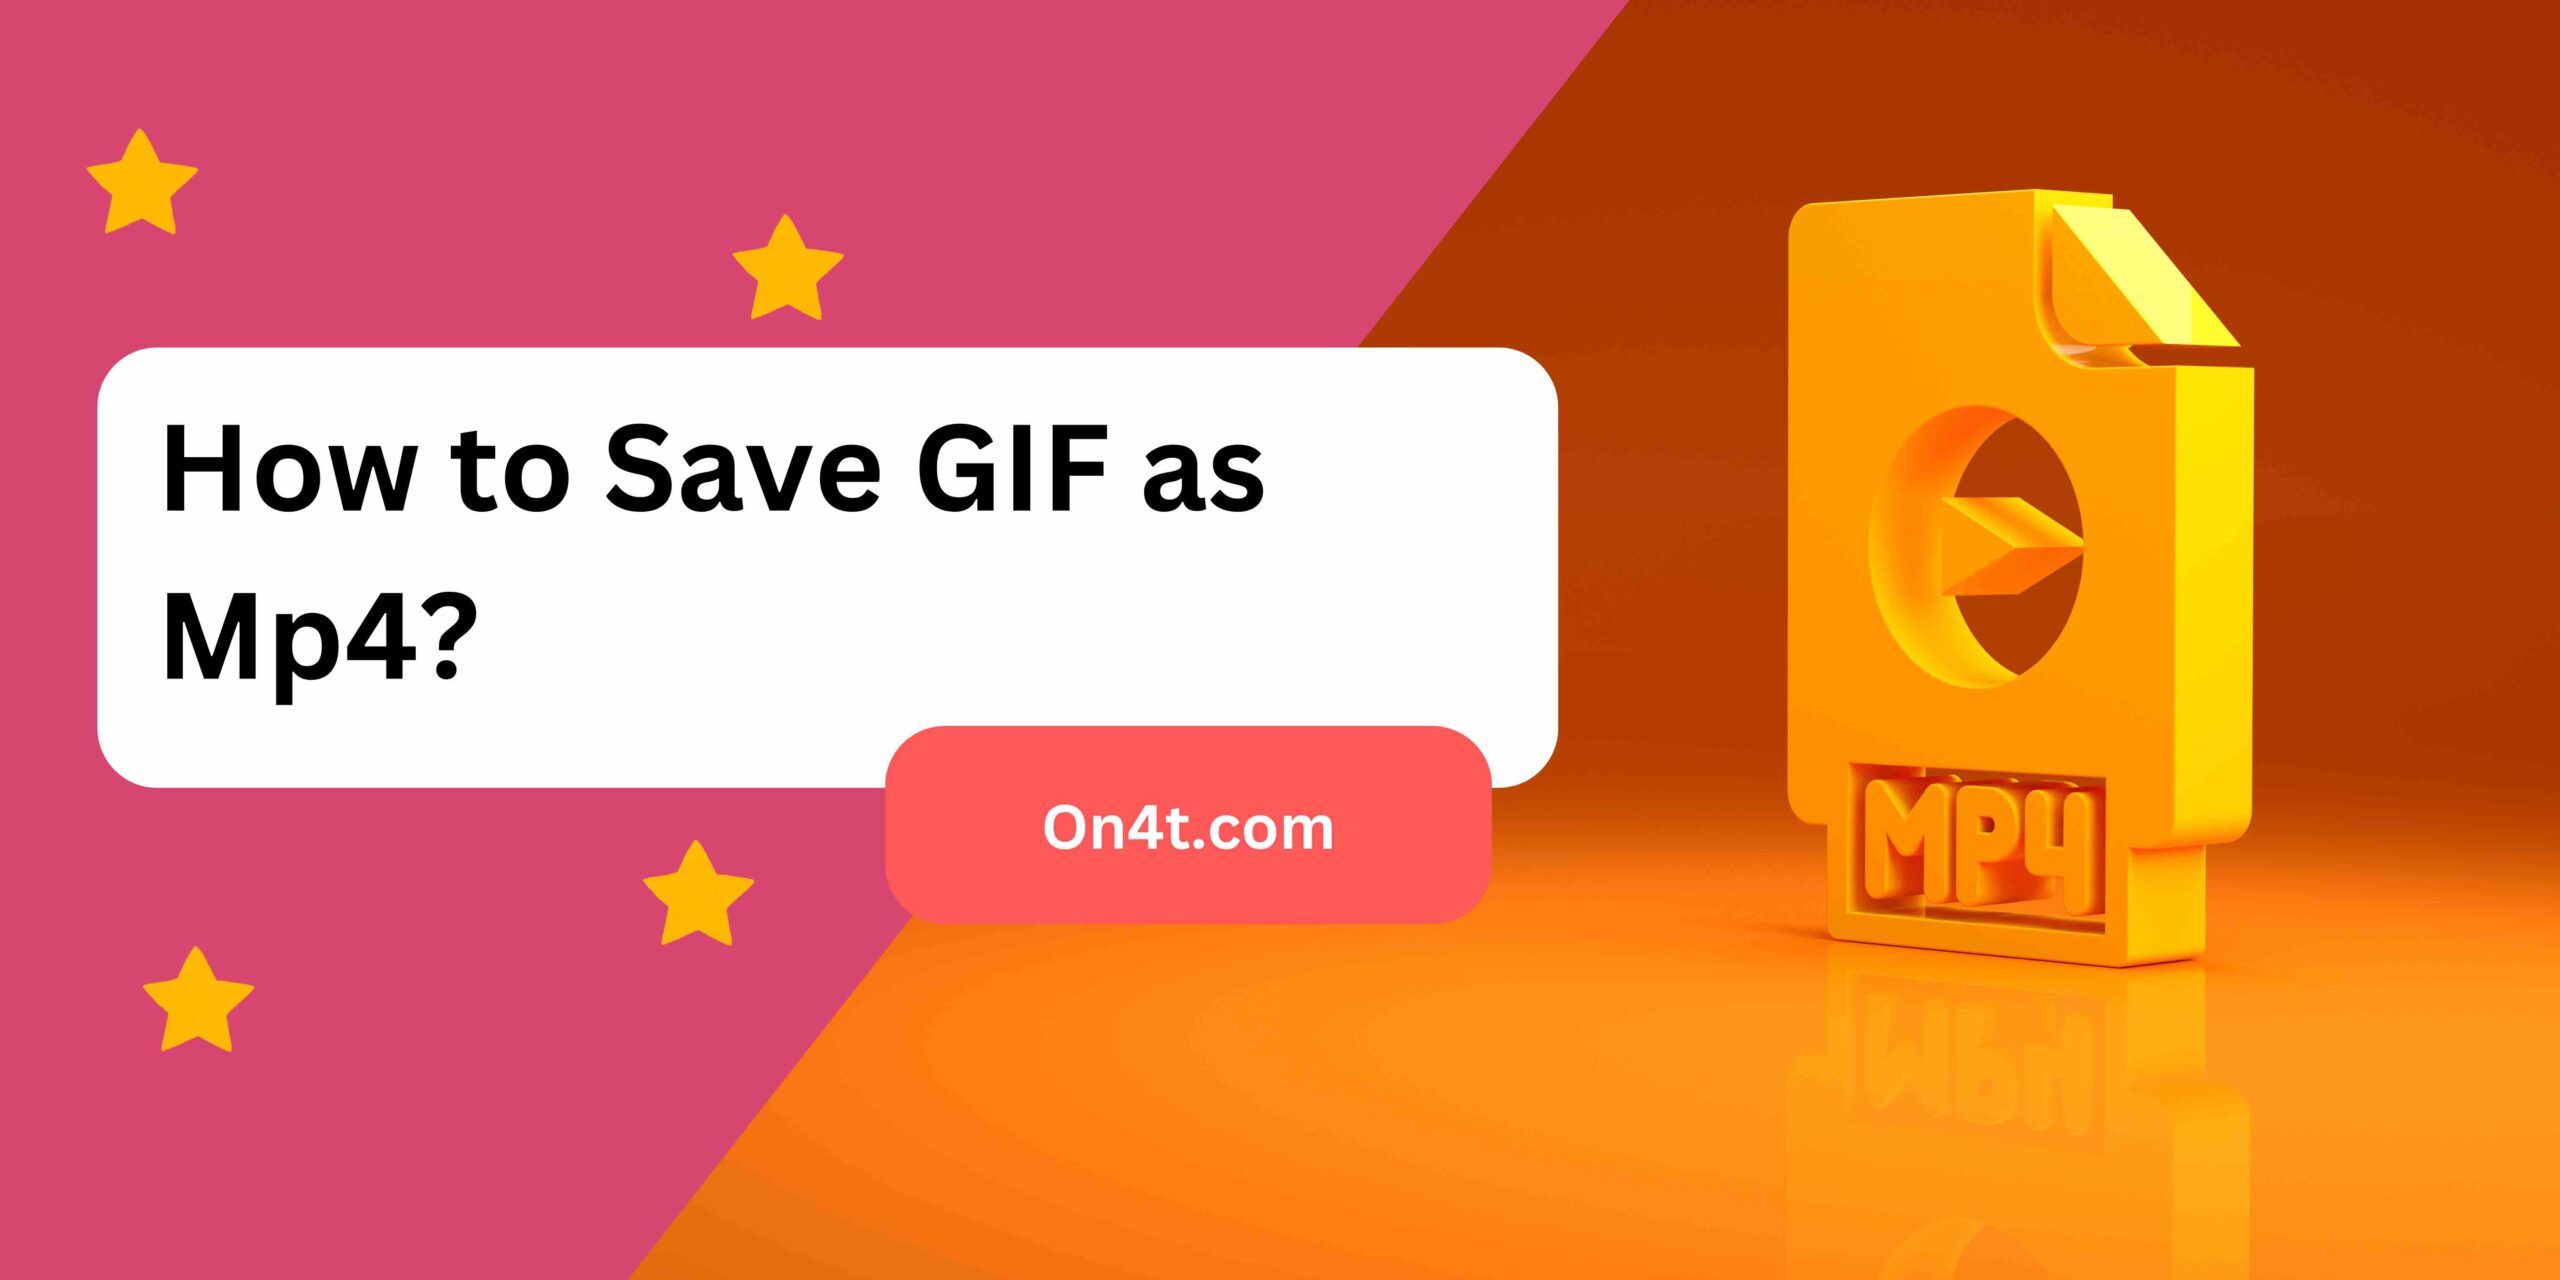 How to Save GIF as Mp4?